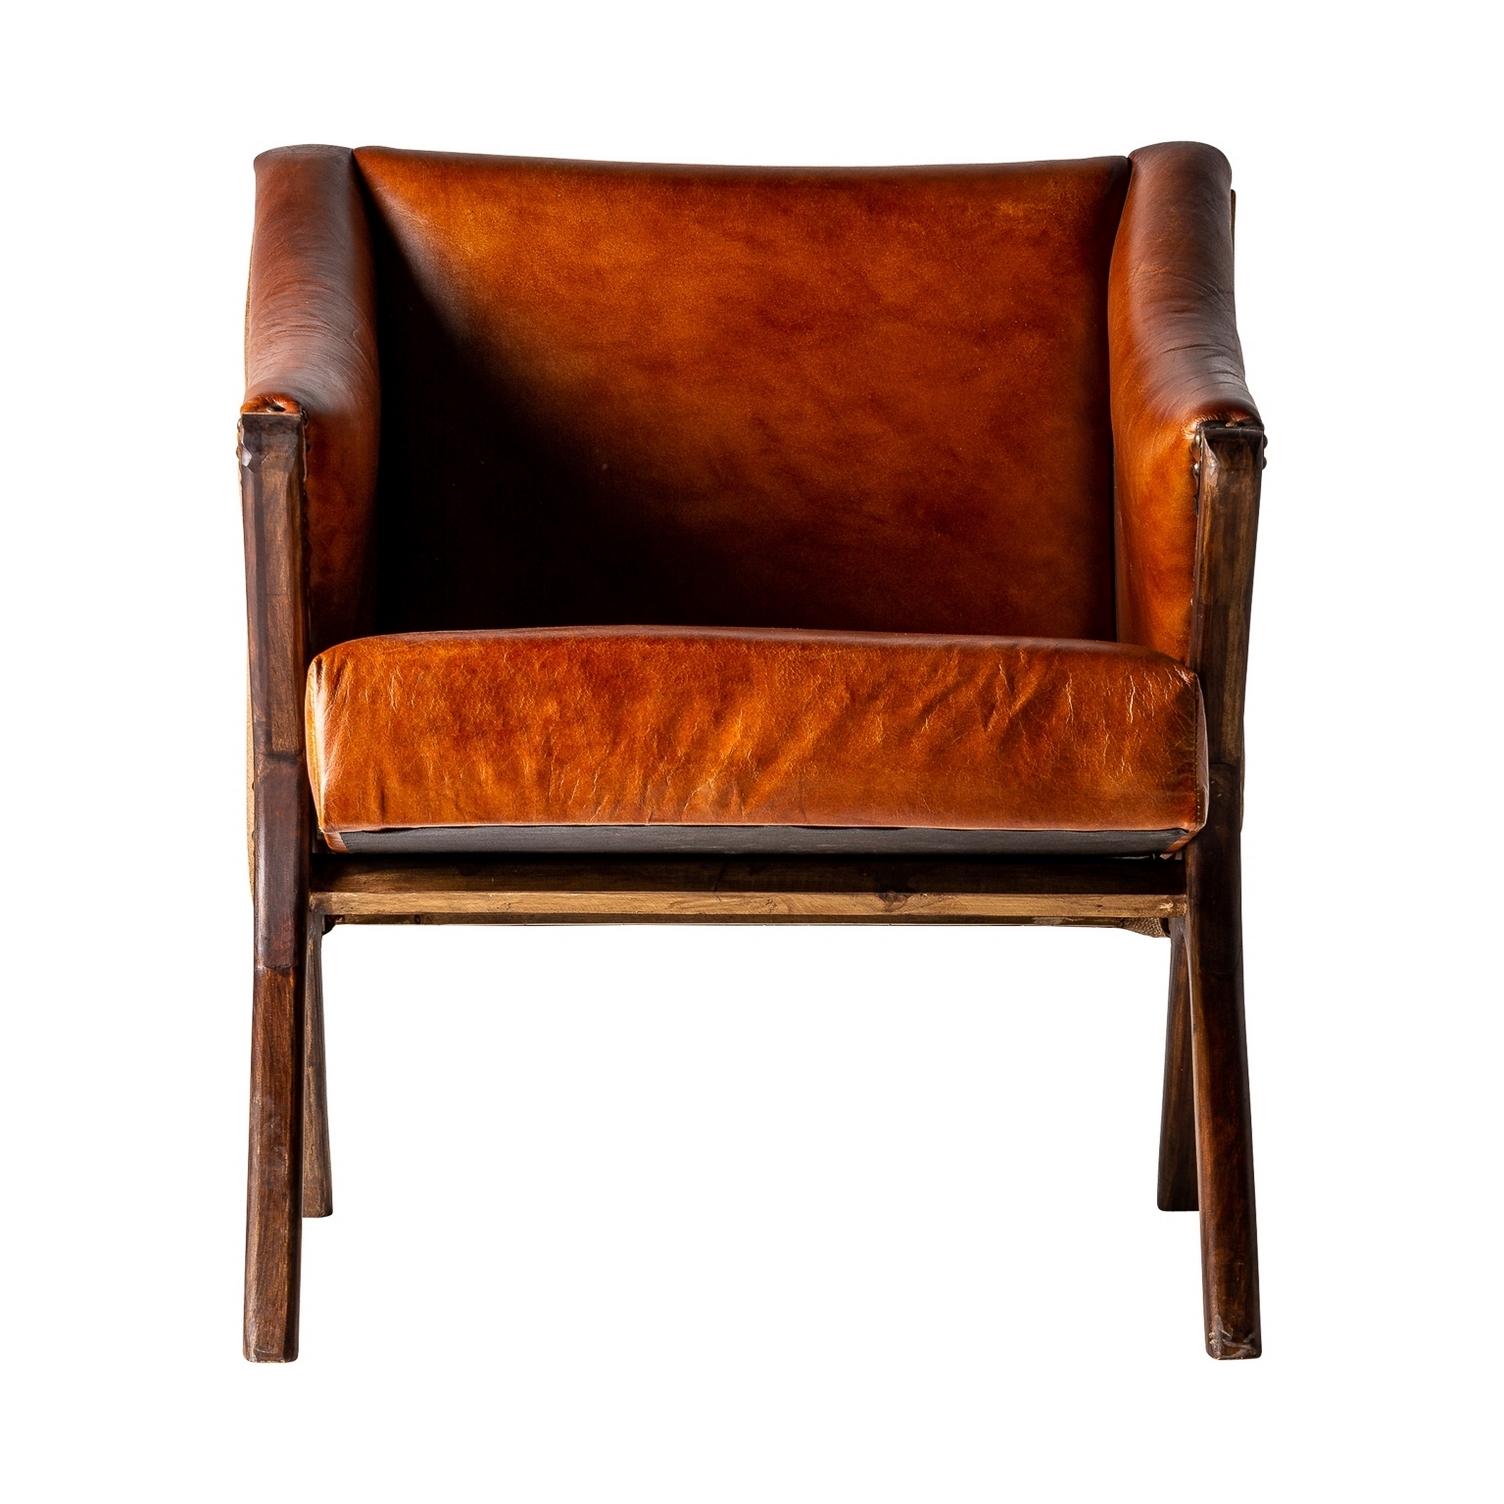 1950s Danish Design Style Cognac Leather and Wooden Armchair 1